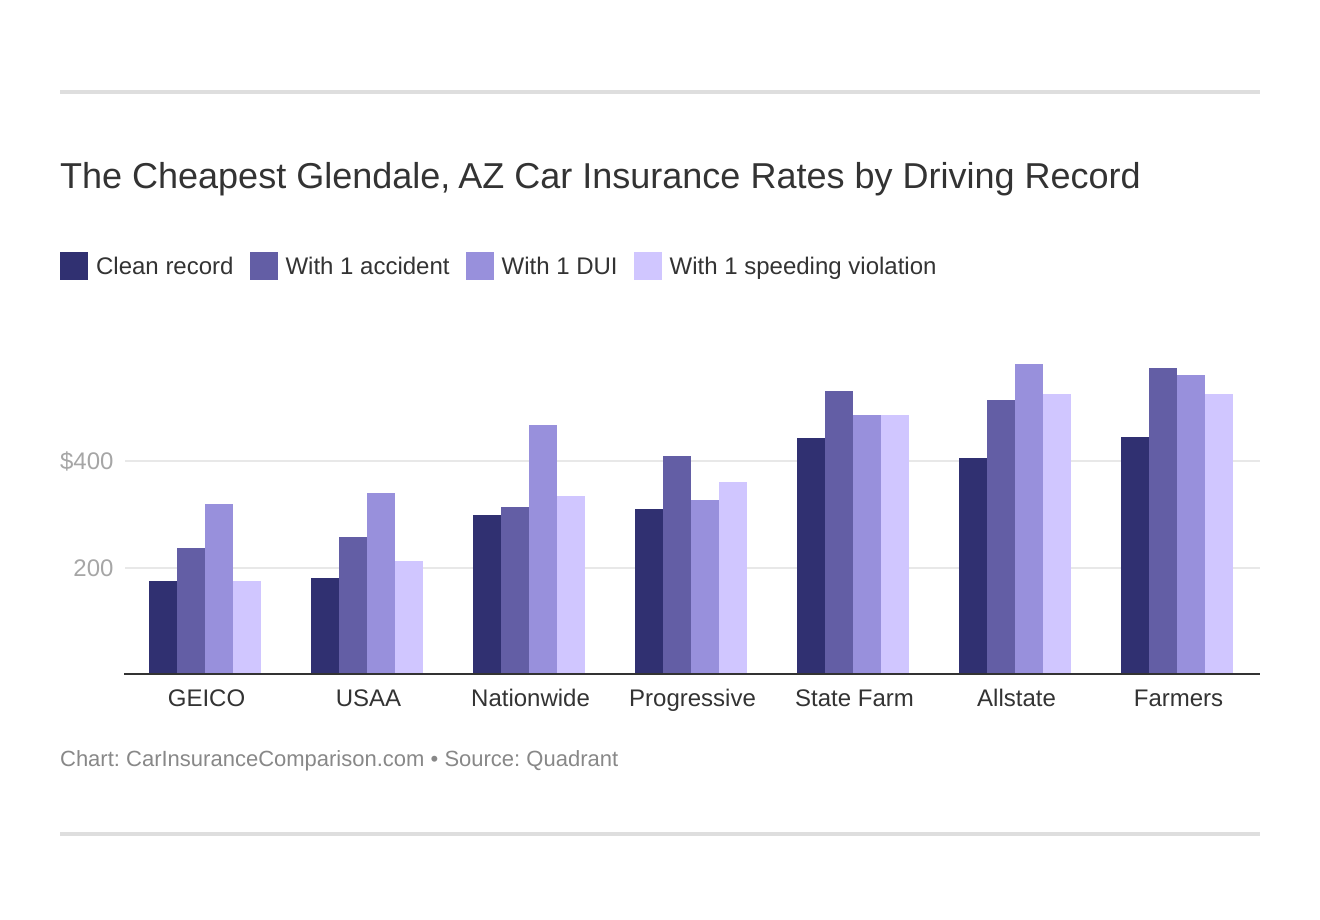 The Cheapest Glendale, AZ Car Insurance Rates by Driving Record